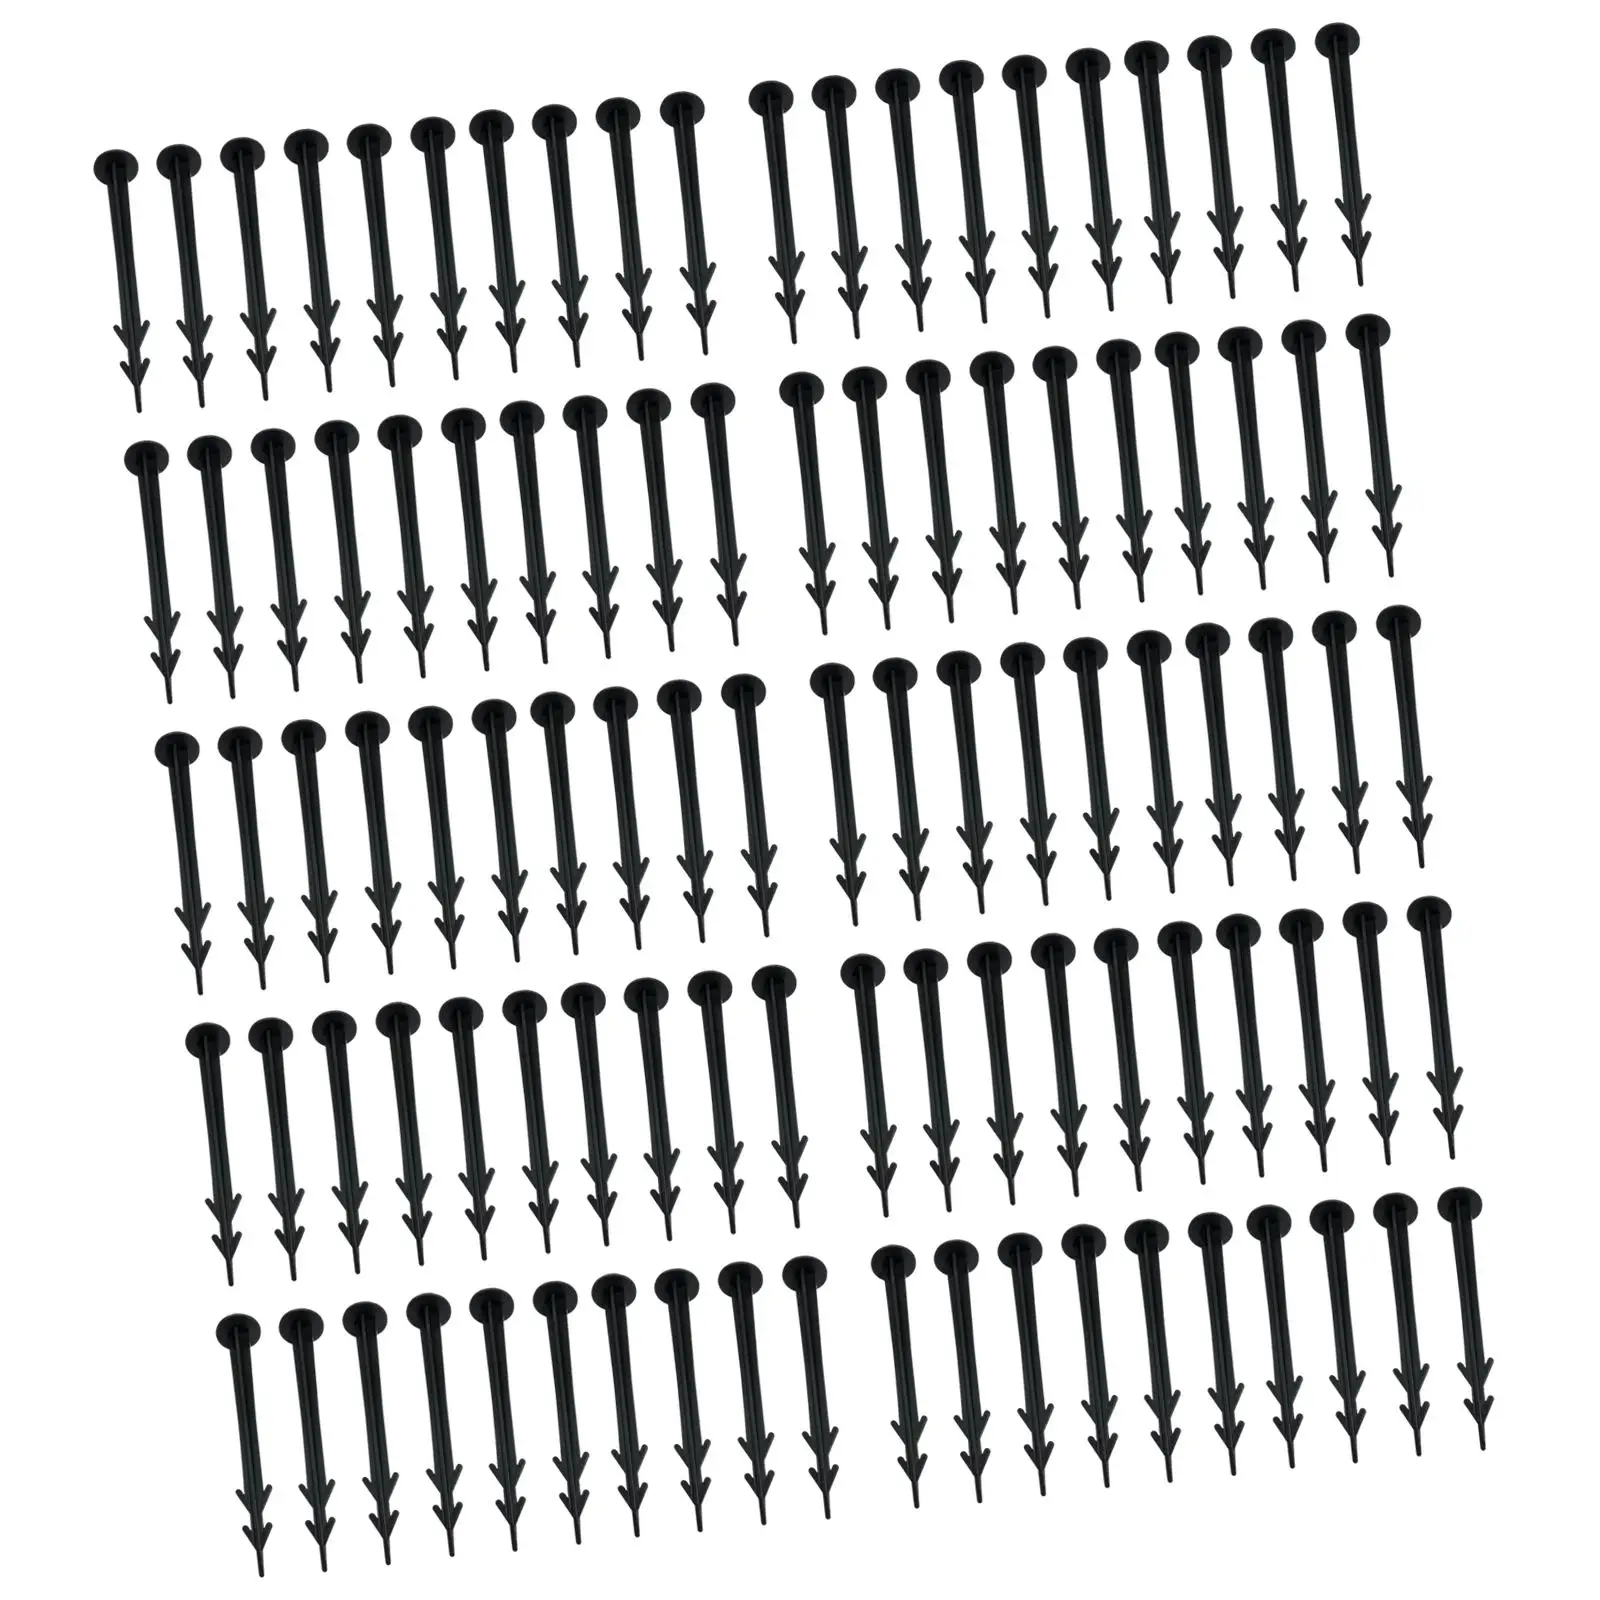 100Pcs Garden Stakes Yard Tents Edging Nails Anchor Fixing Anchor Pegs for Landscape Fabric Lawn Edging Holding Down Tents